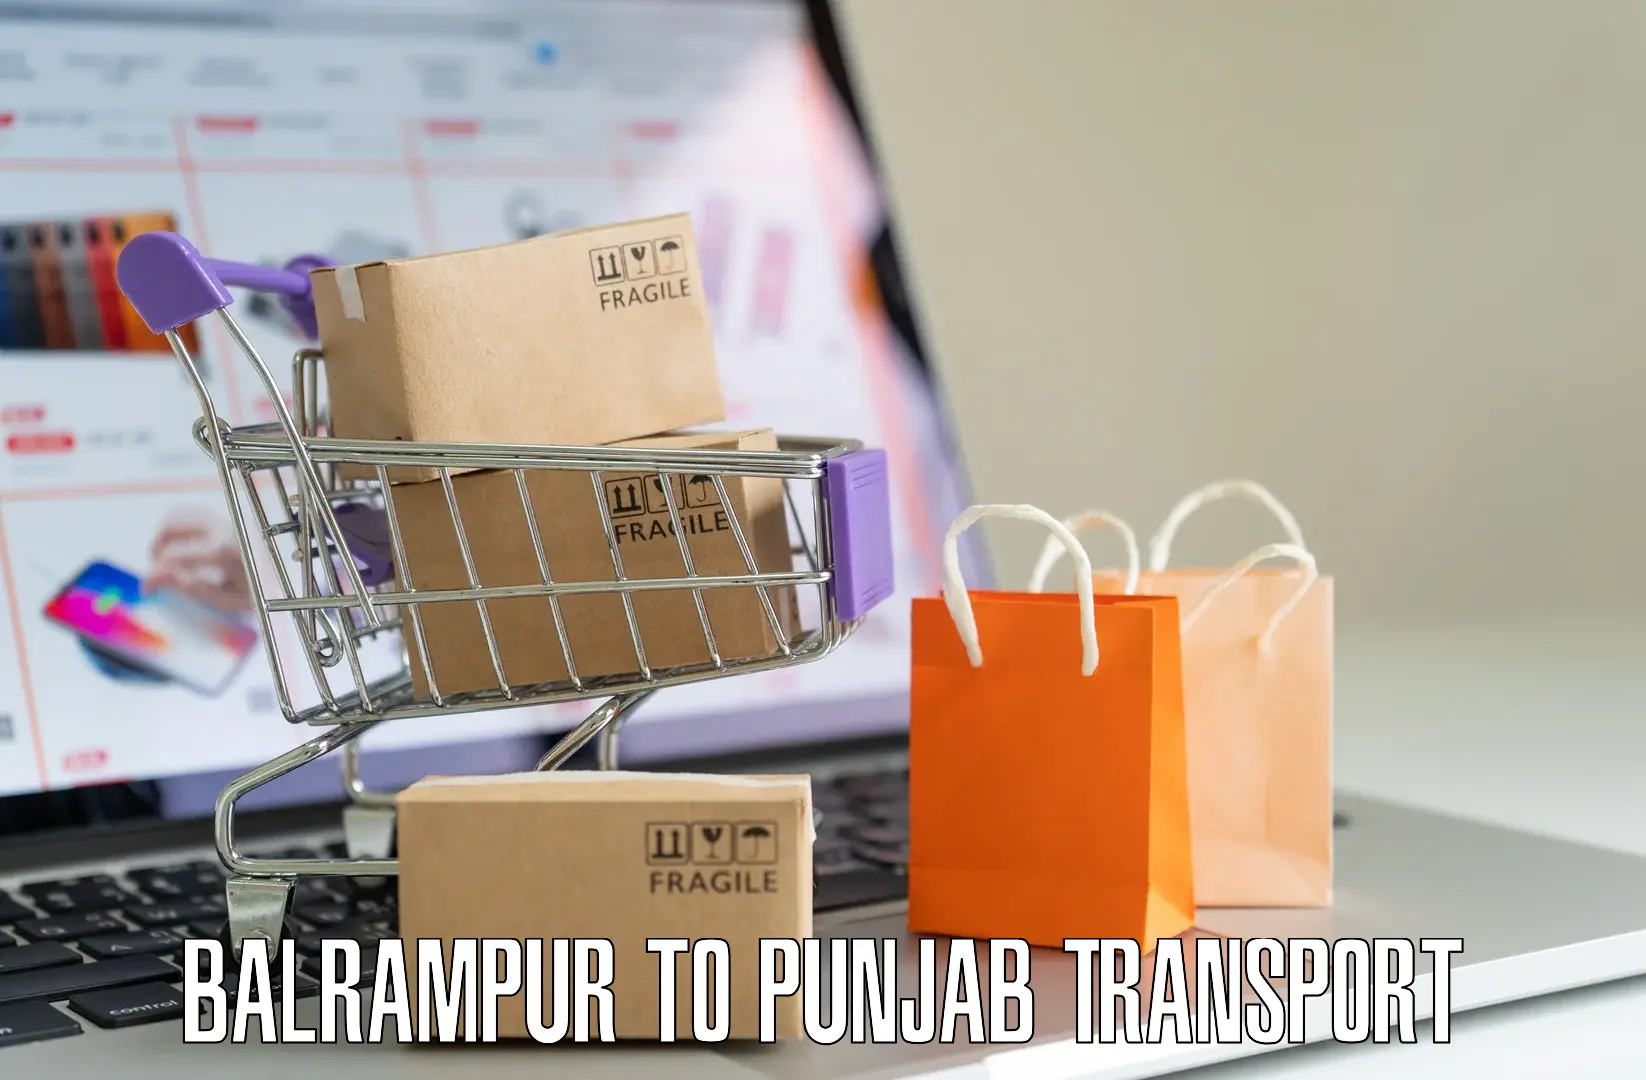 Daily transport service Balrampur to Thapar Institute of Engineering and Technology Patiala